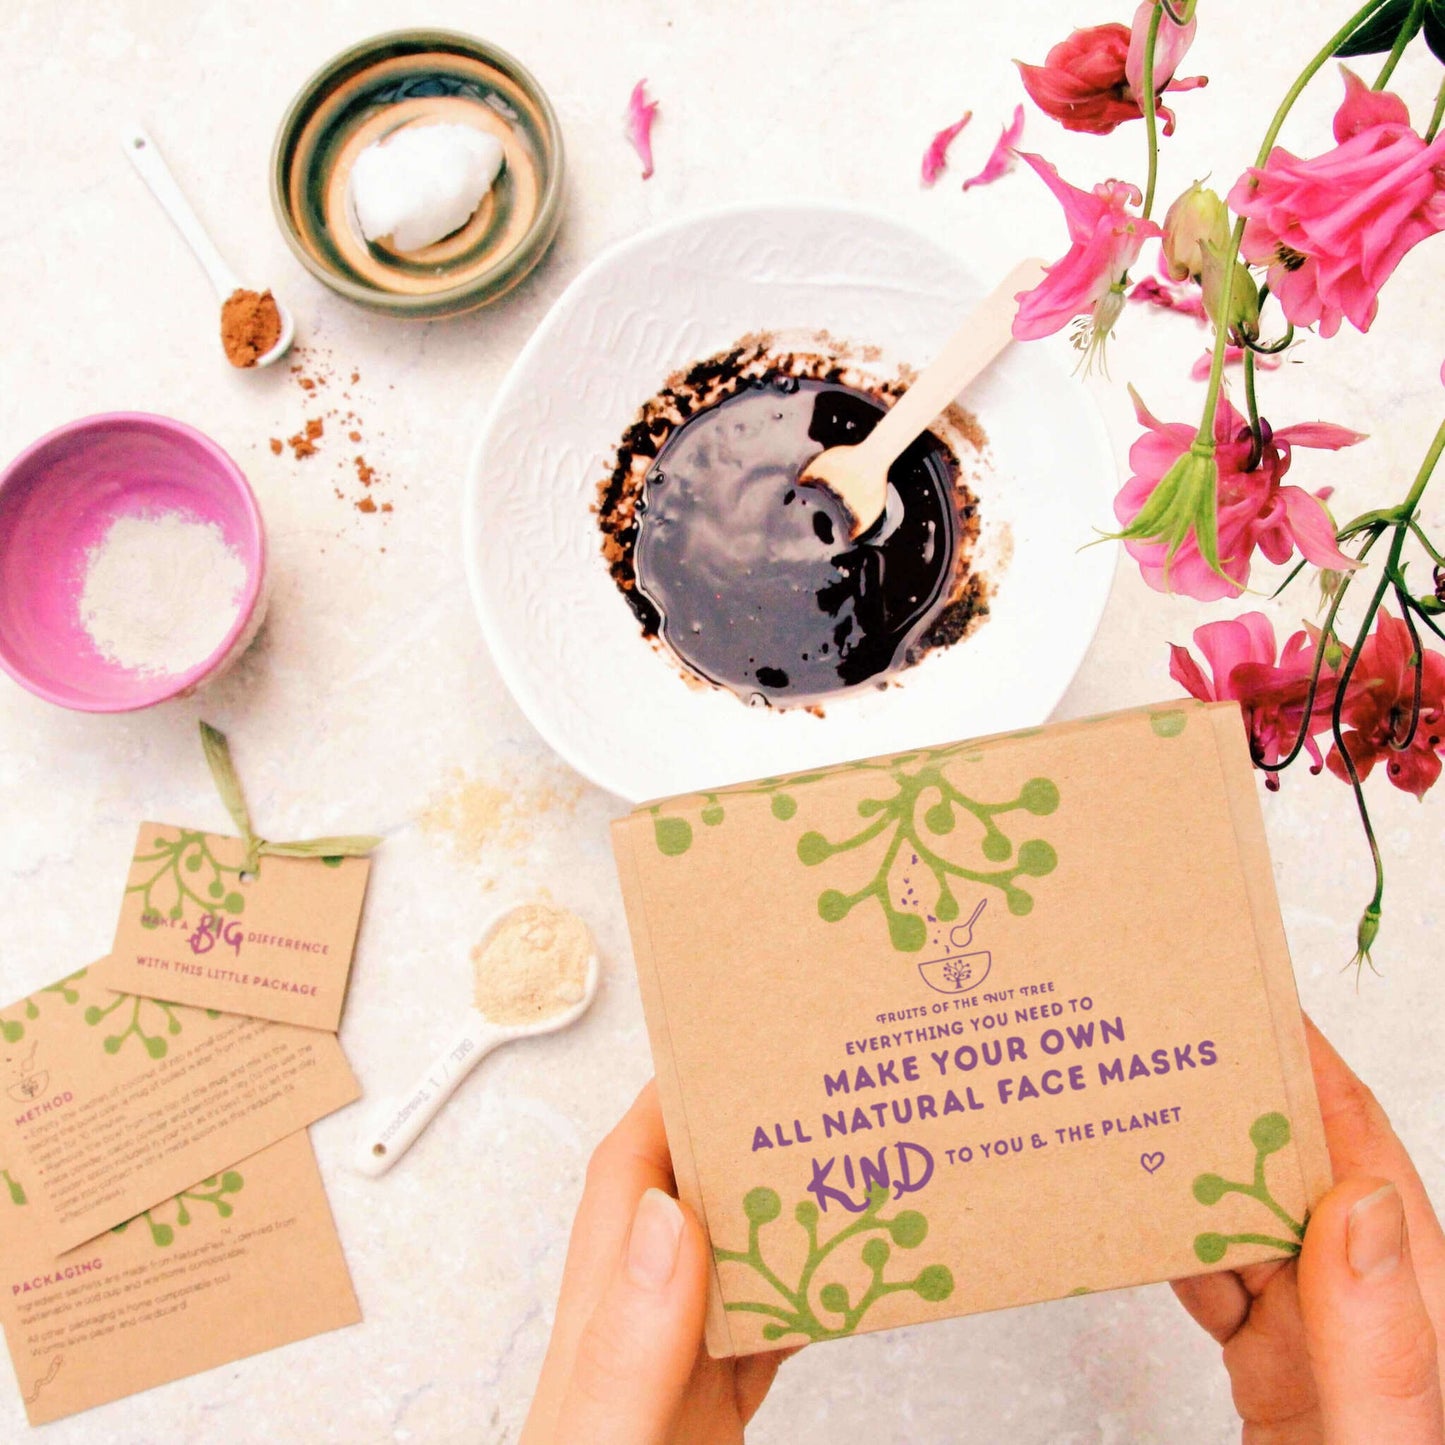 make your own face mask kit box with organic ingredients